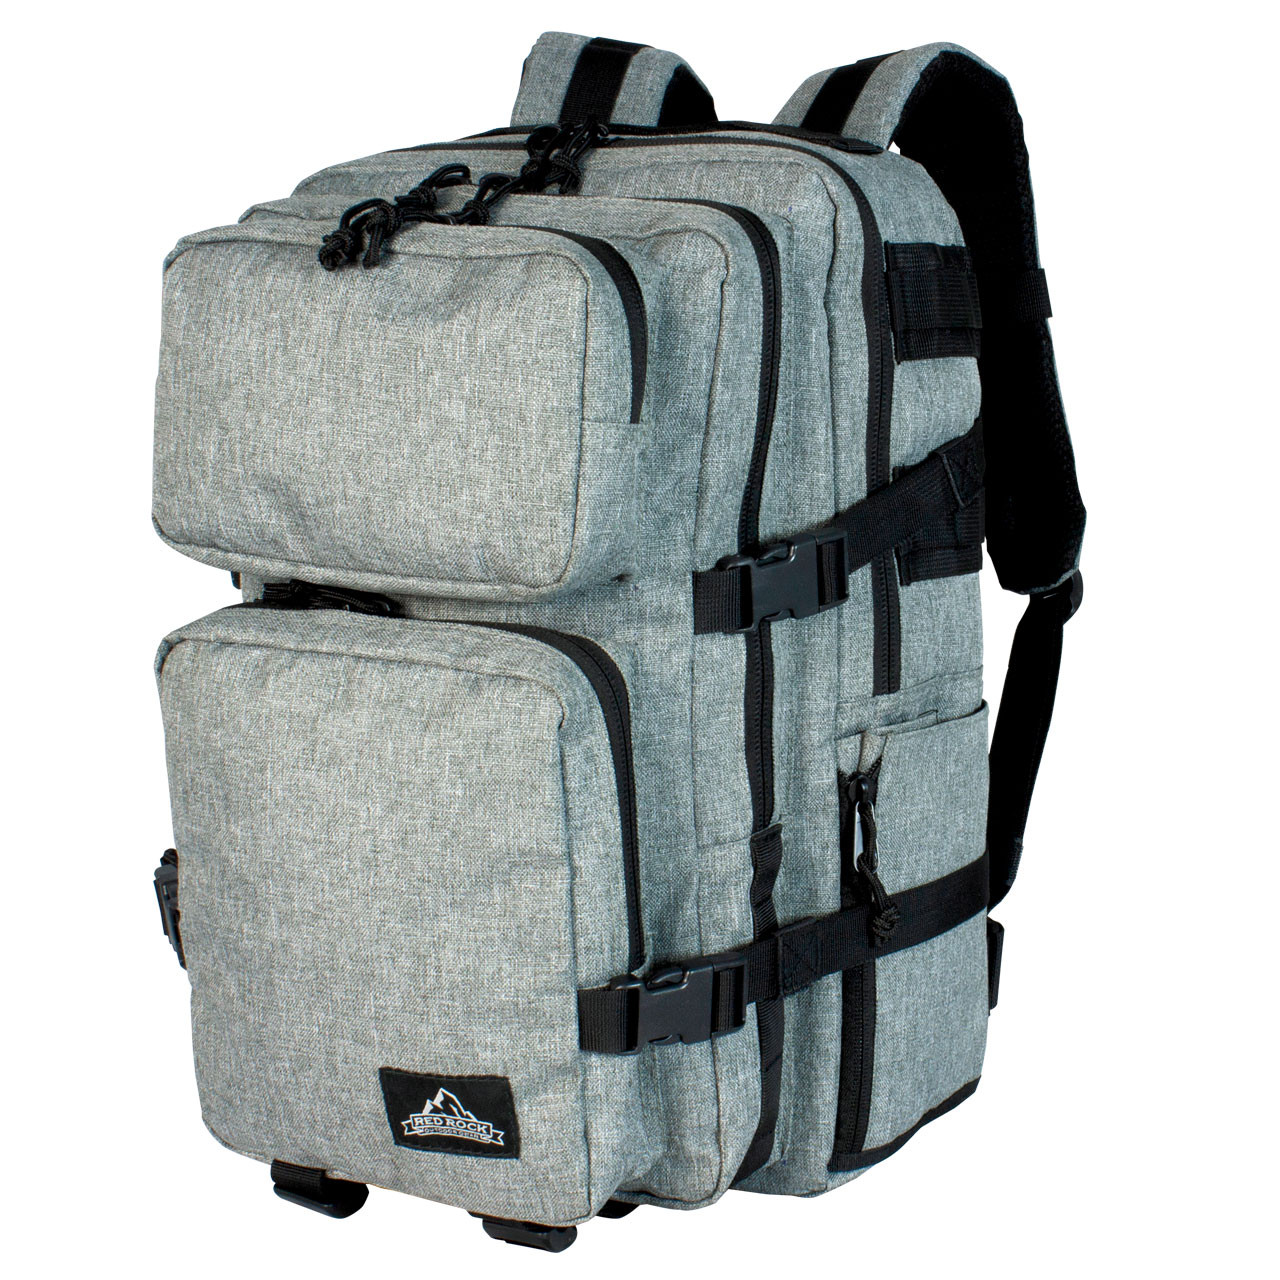 Large Urban Assault Pack - Gray - Front